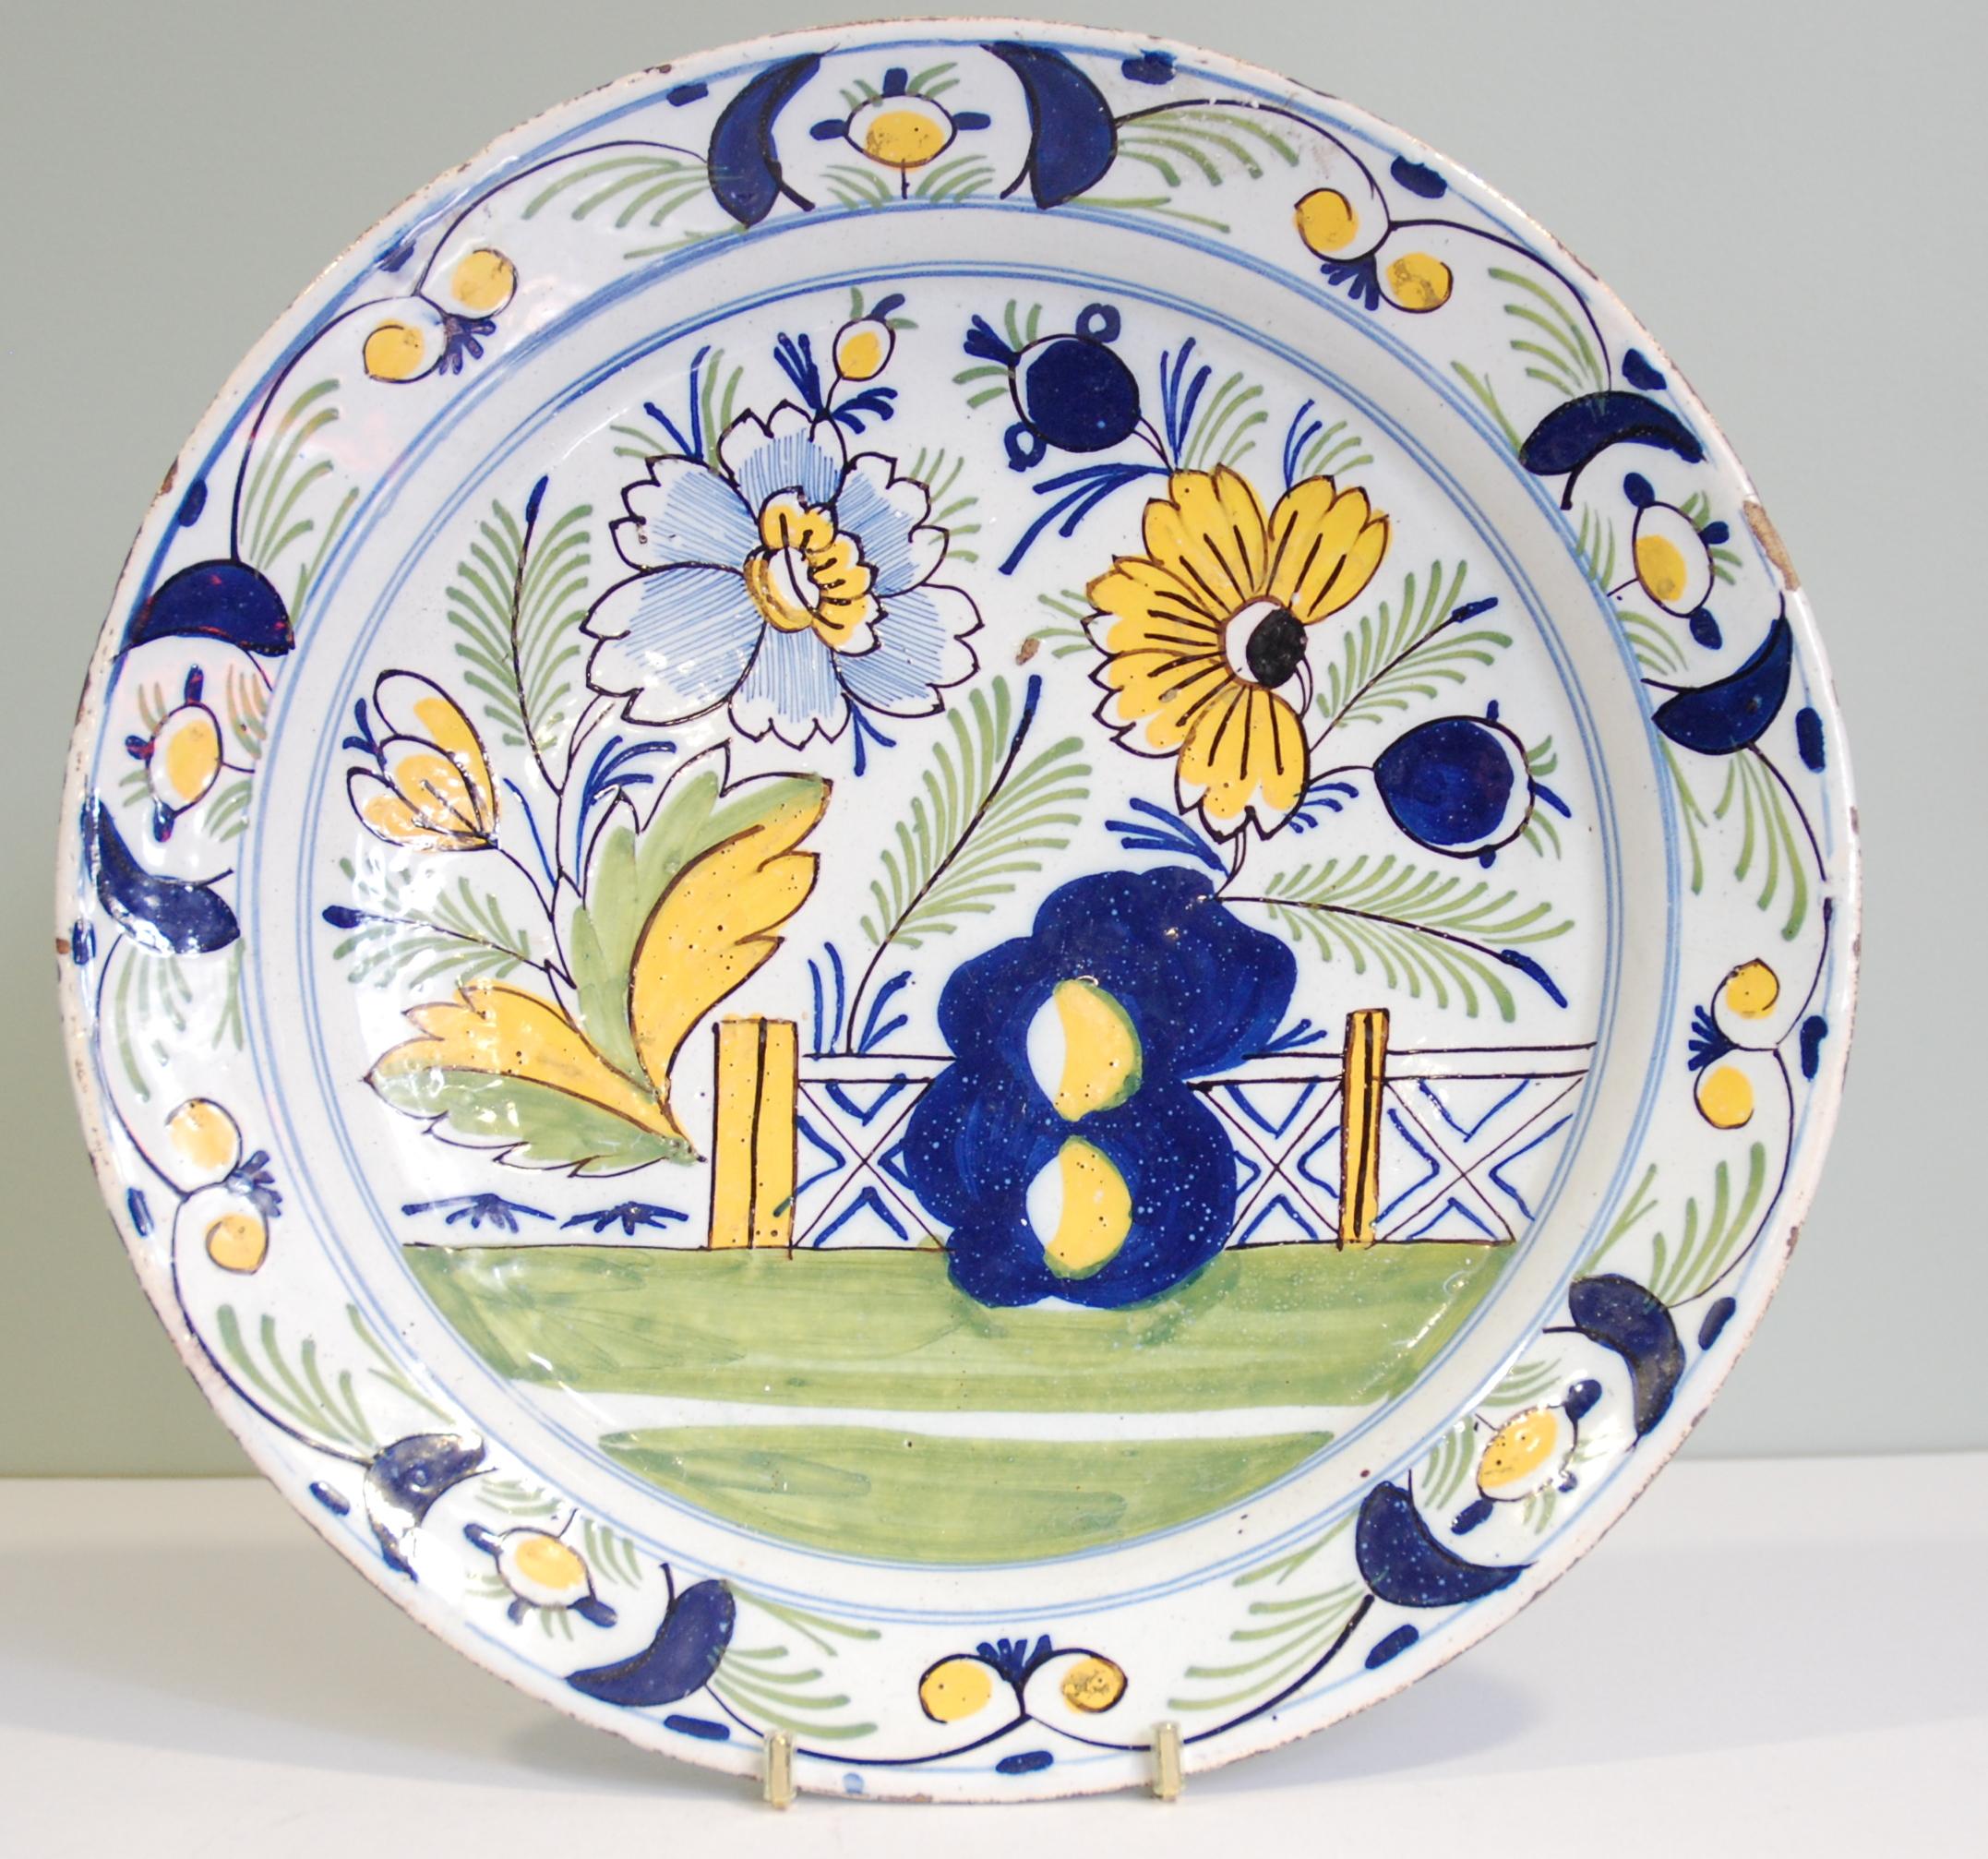 A fine and large charger, with typical polychrome decoration.

English Delftware is considered to be one of the most important forms of English ceramic production of the period, and it had a major influence on the development of the British ceramics